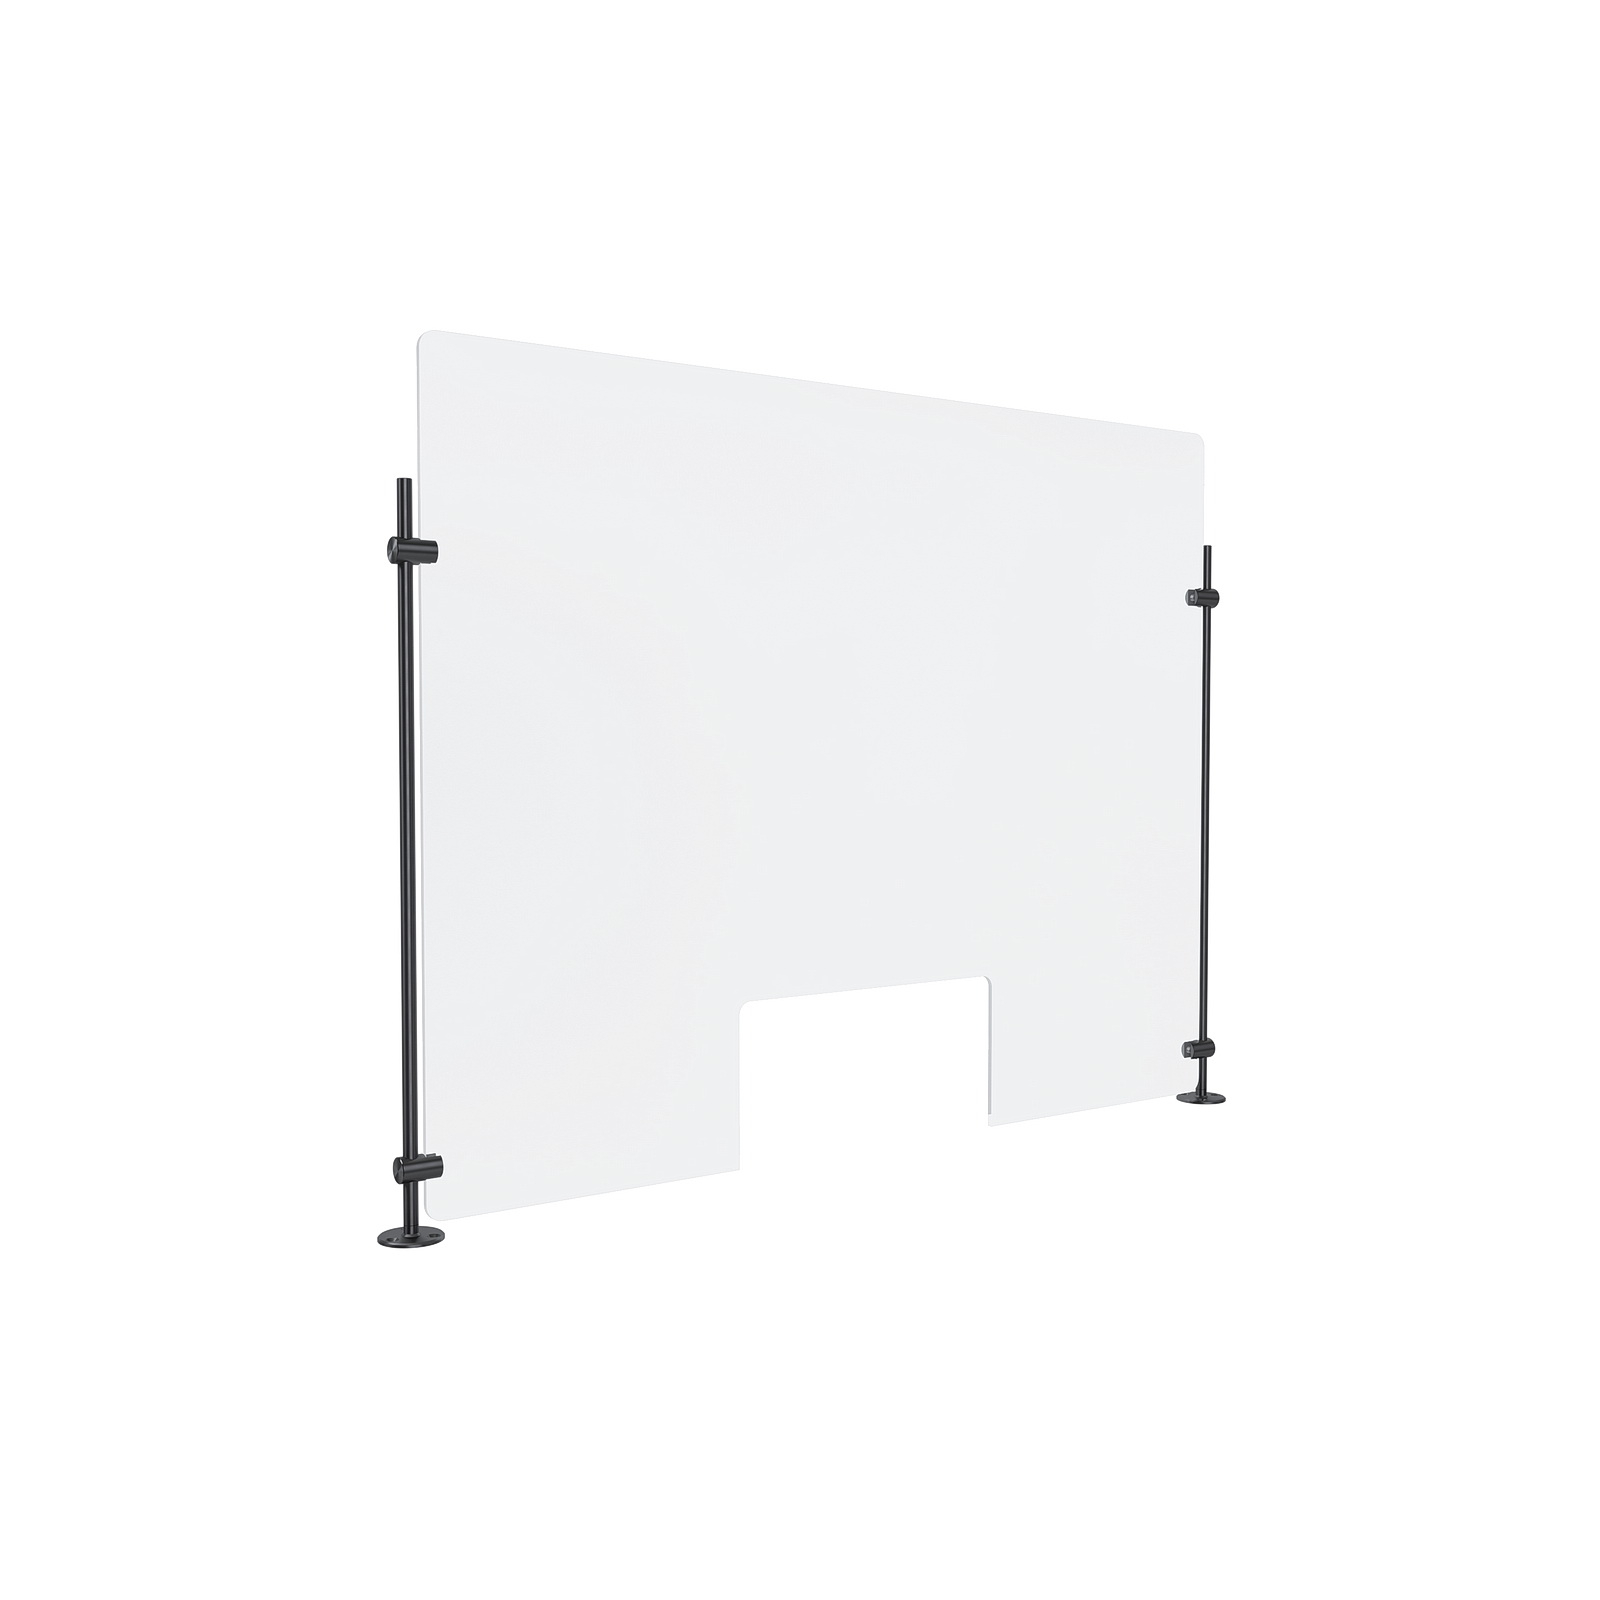 Clear Acrylic Sneeze Guard 30'' Wide x 23-1/2'' Tall (10'' x 5'' Cut Out), with (2) 20'' Tall x 3/8'' Diameter Black Anodized Aluminum Rod on the Side...